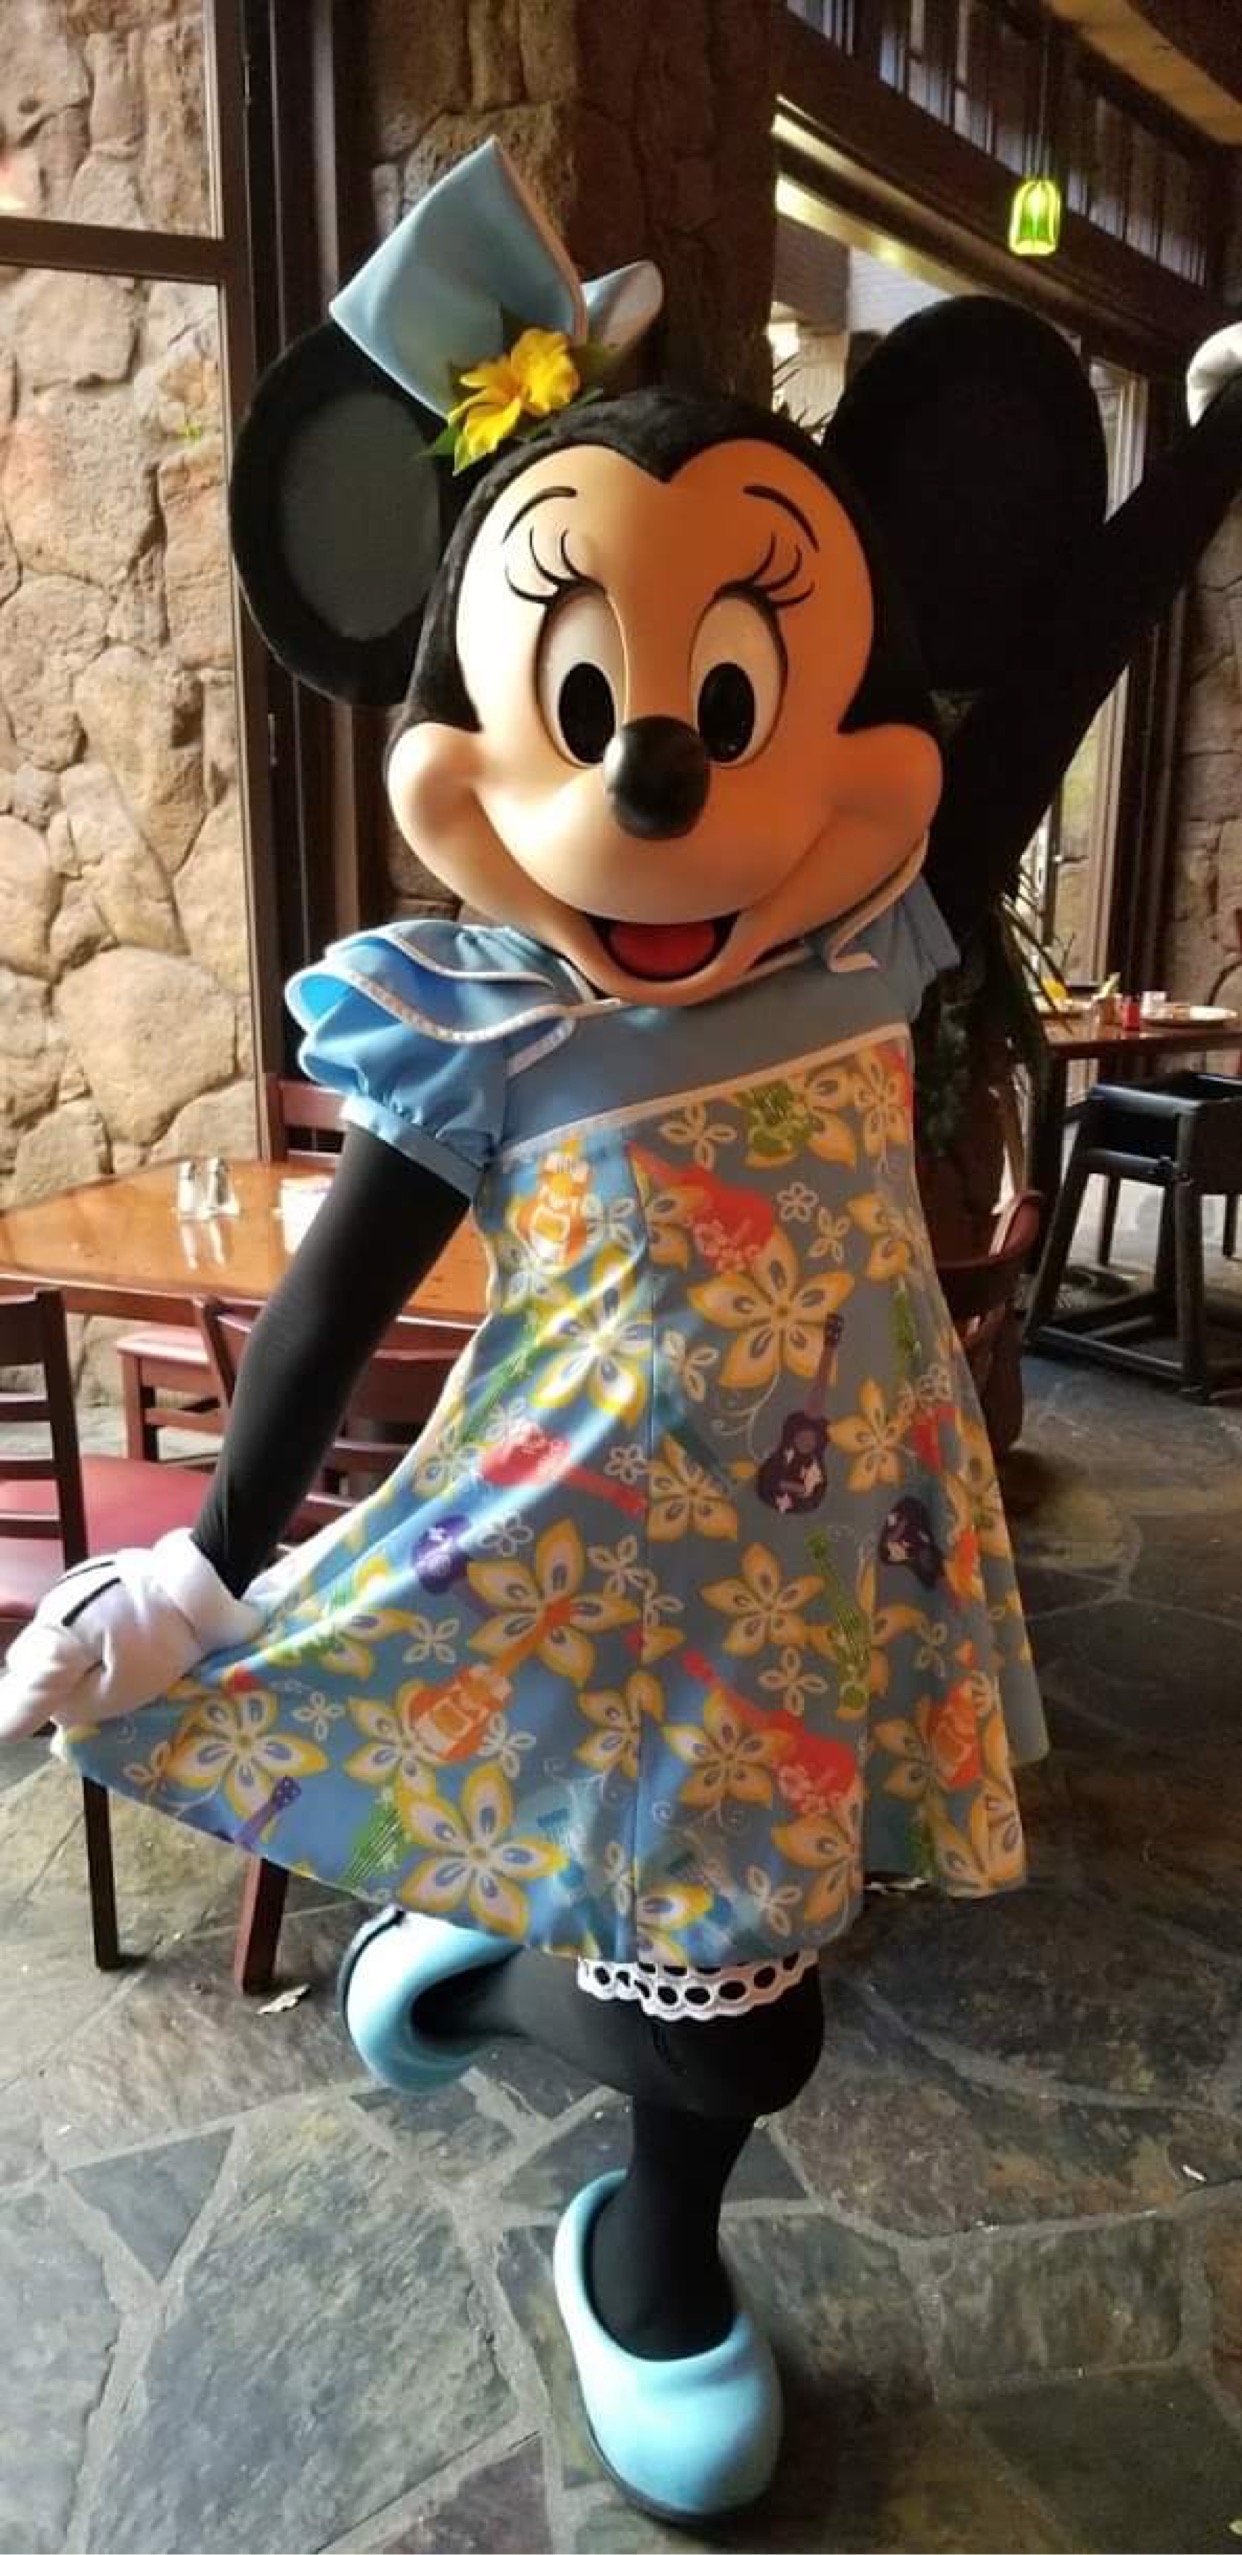 Character Dining is returning to Disney's Aulani Resort